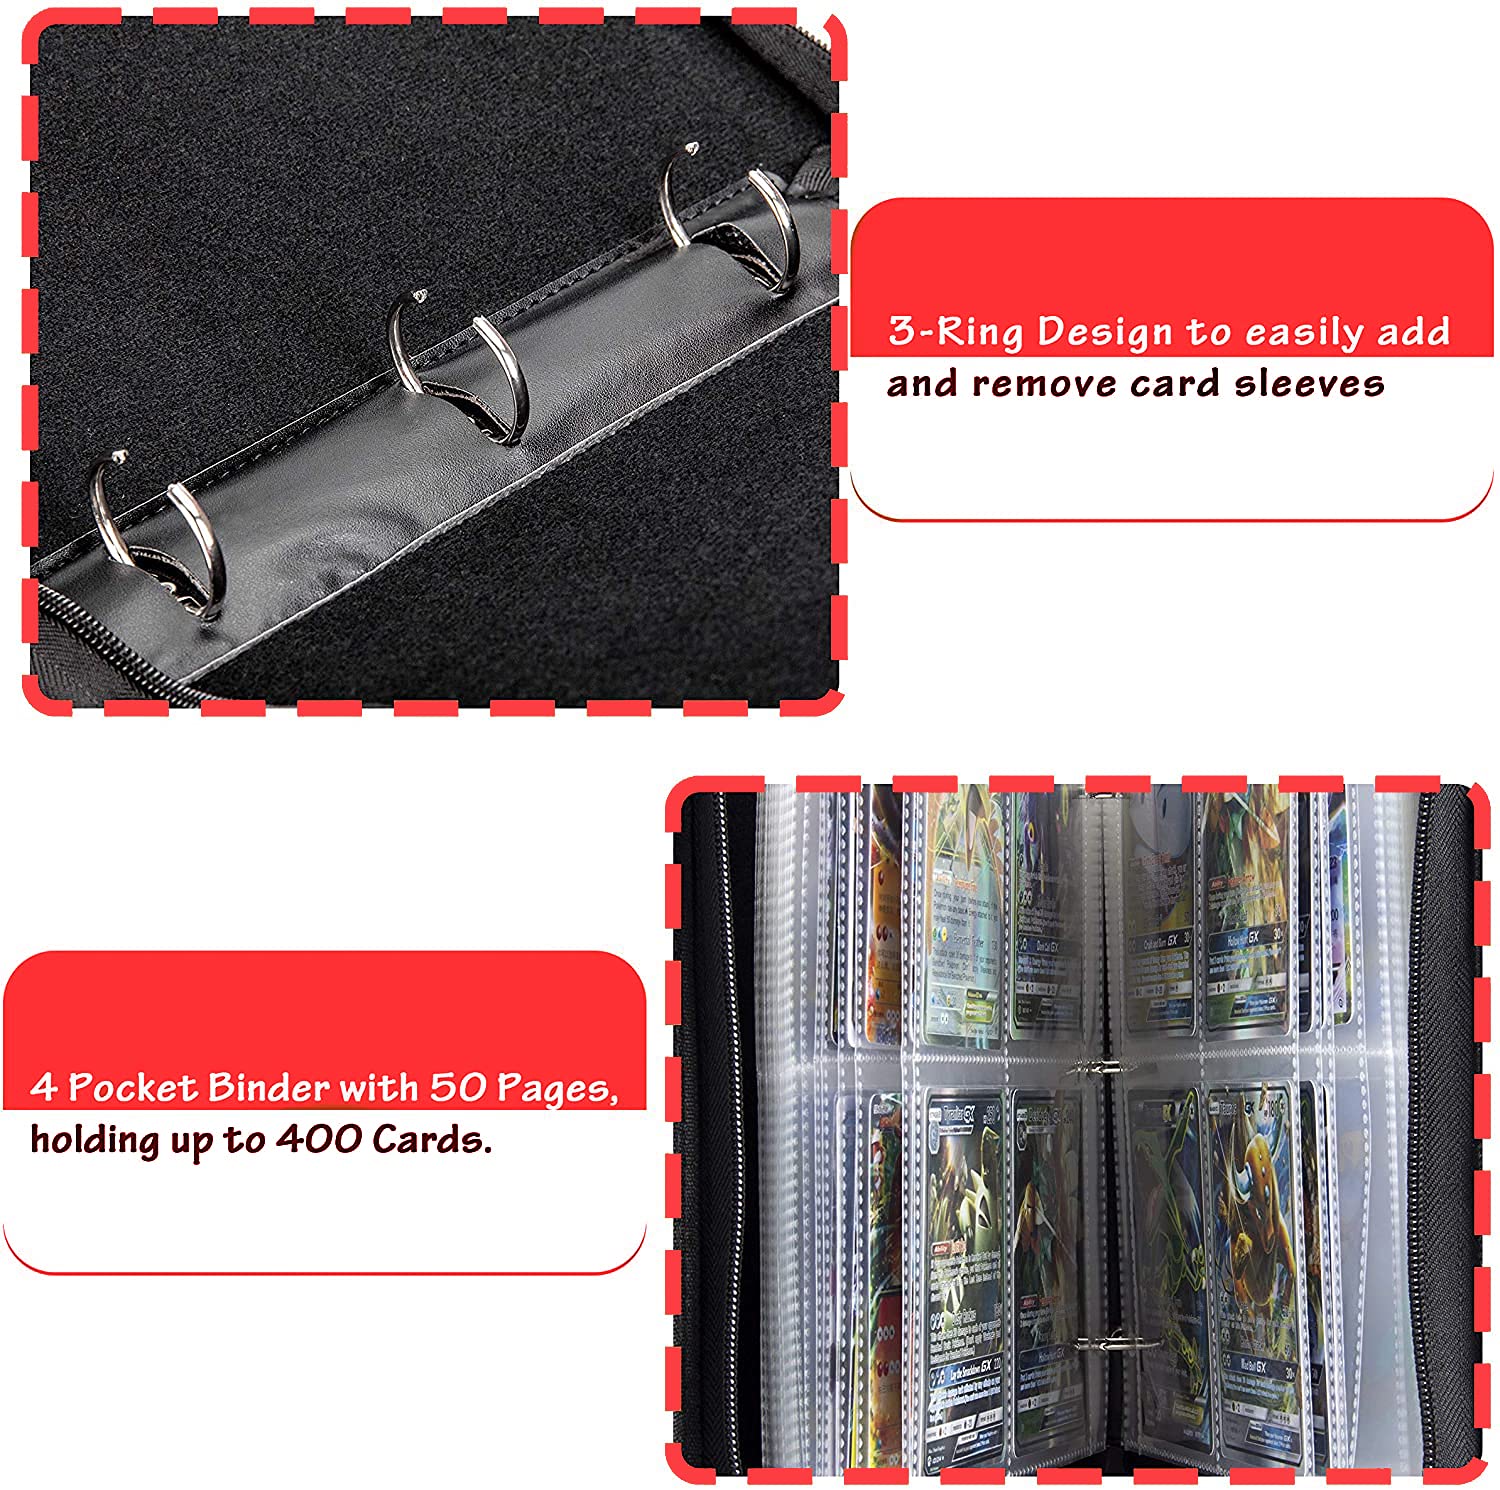 Binder for Pokemon Cards with Sleeves, Card Binder Holder Book Compatible with Pokémon Trading Cards, Holds Up to 400 Cards, 50 Pcs 4-Pocket Pages, Card Collector Album with Zipper Carrying Case